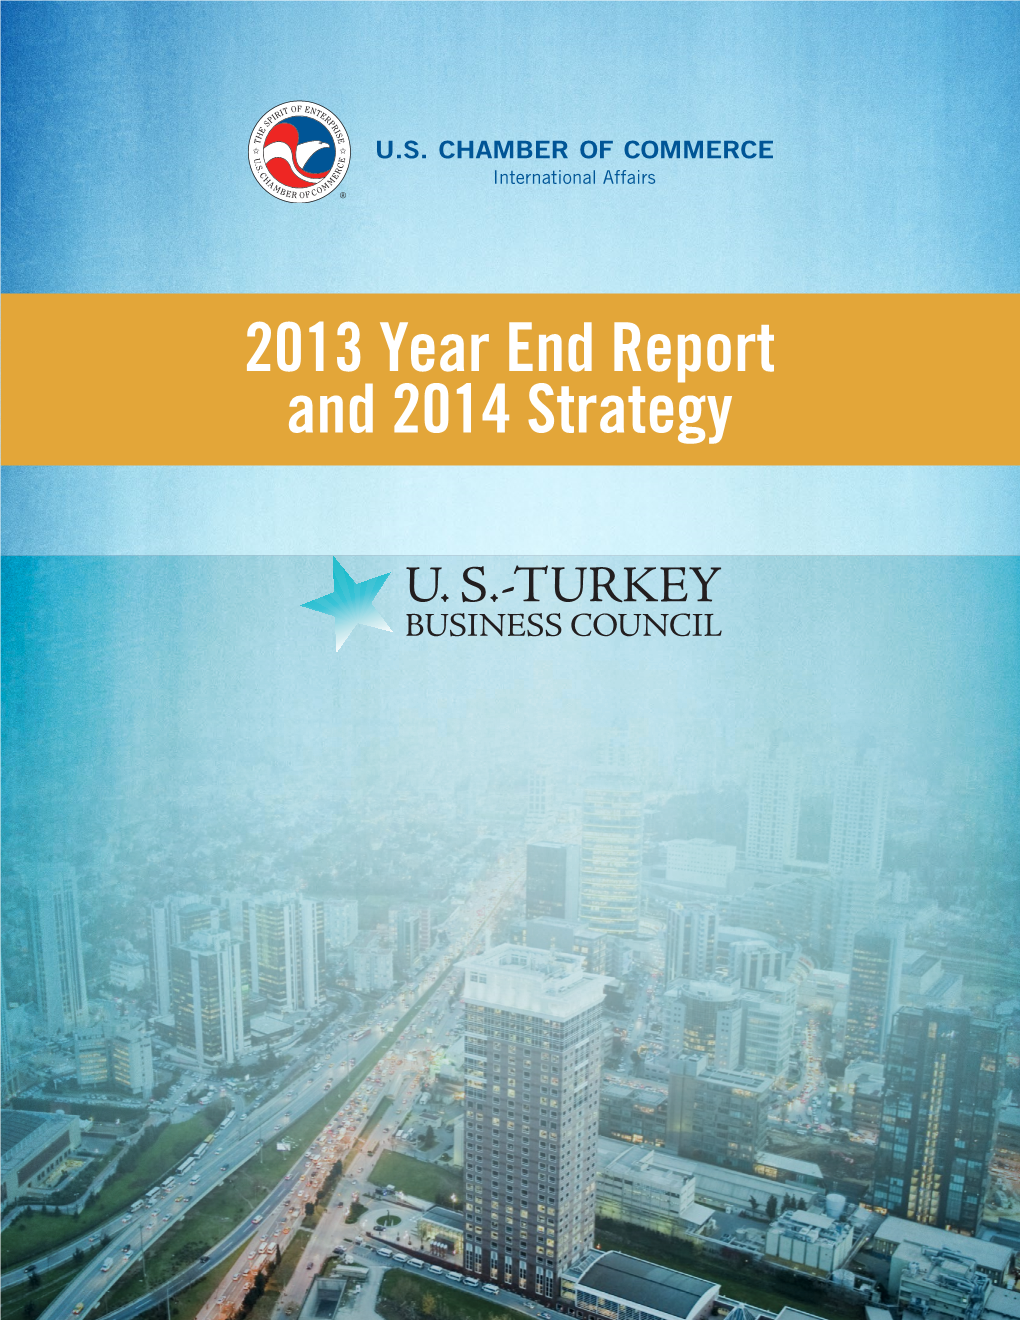 2013 Year End Report and 2014 Strategy a Council of the U.S